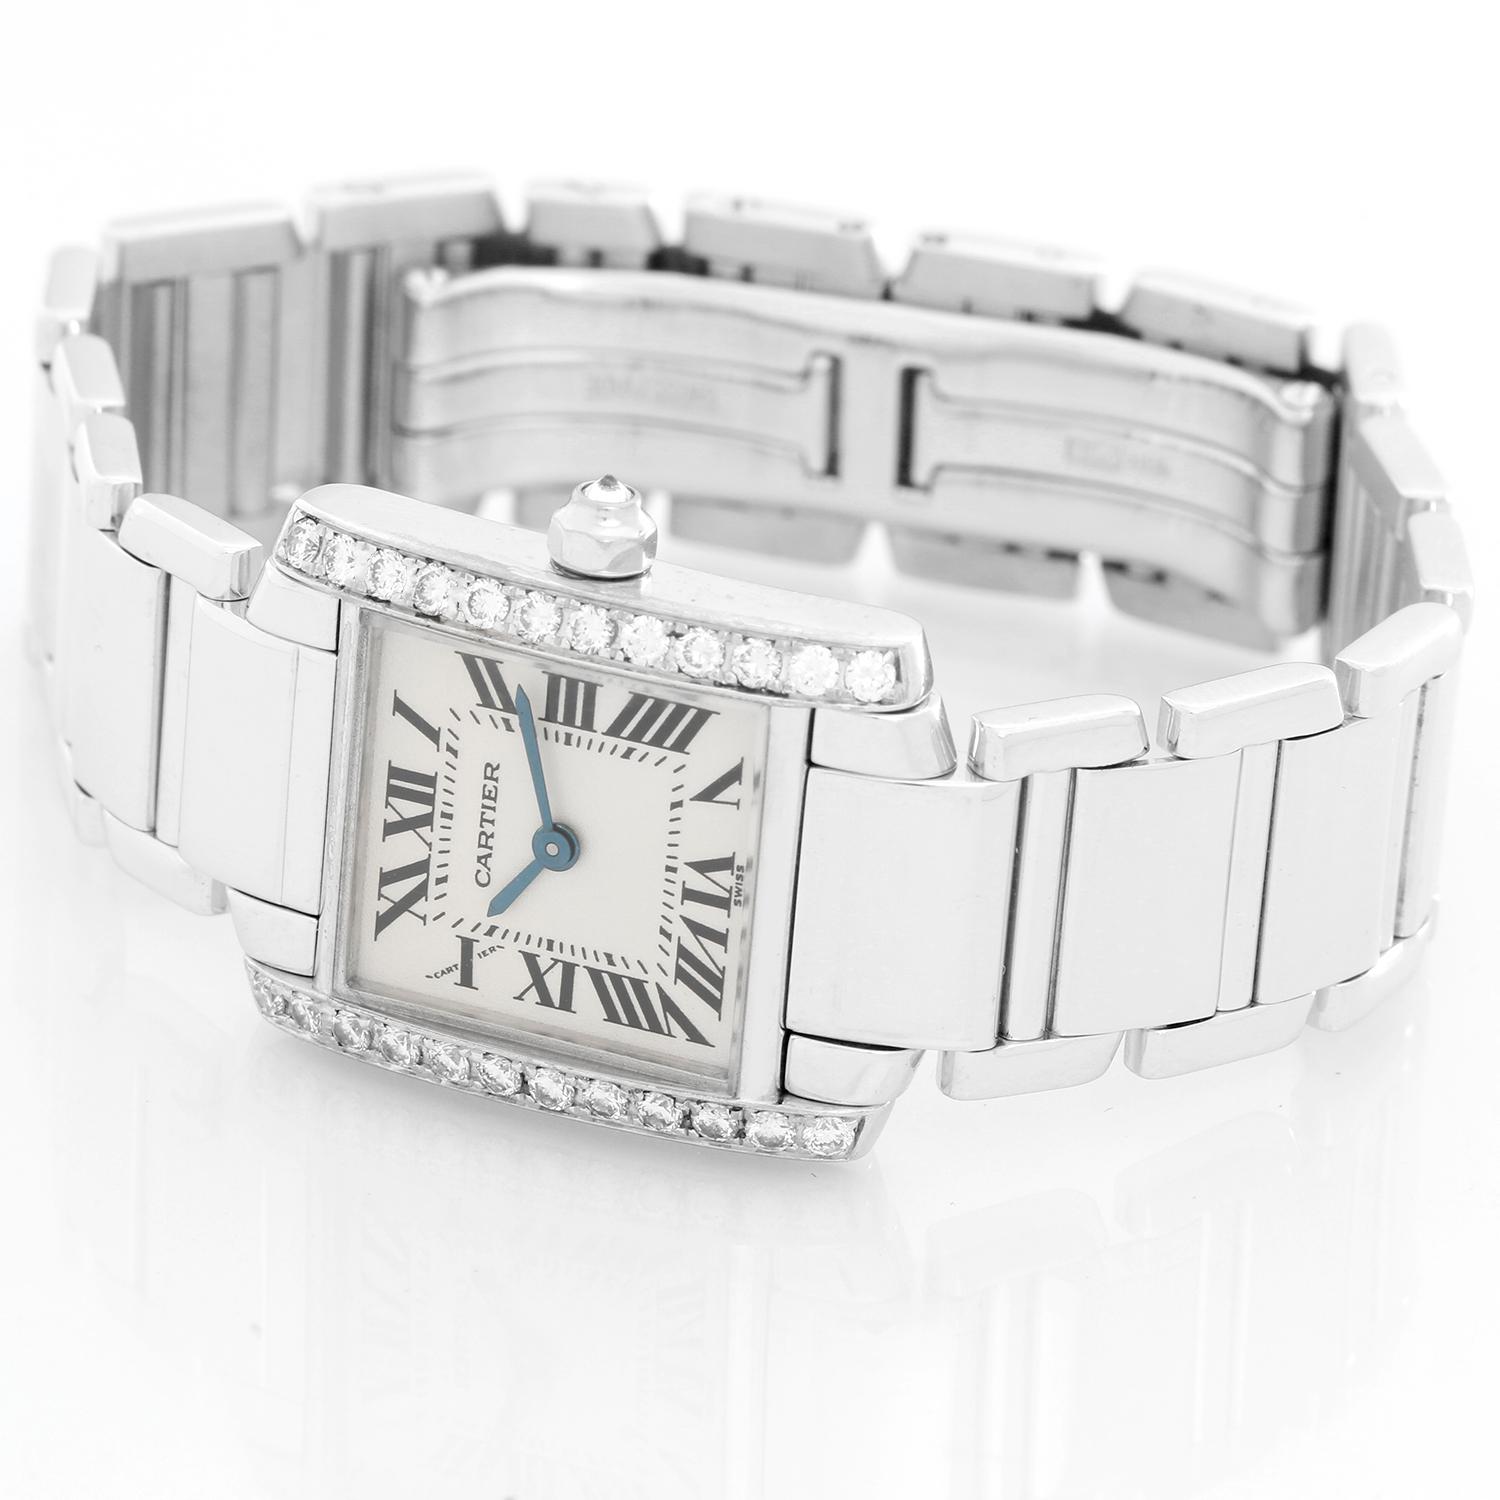 cartier tank francaise 18kt white gold diamond ladies watch we1002s3